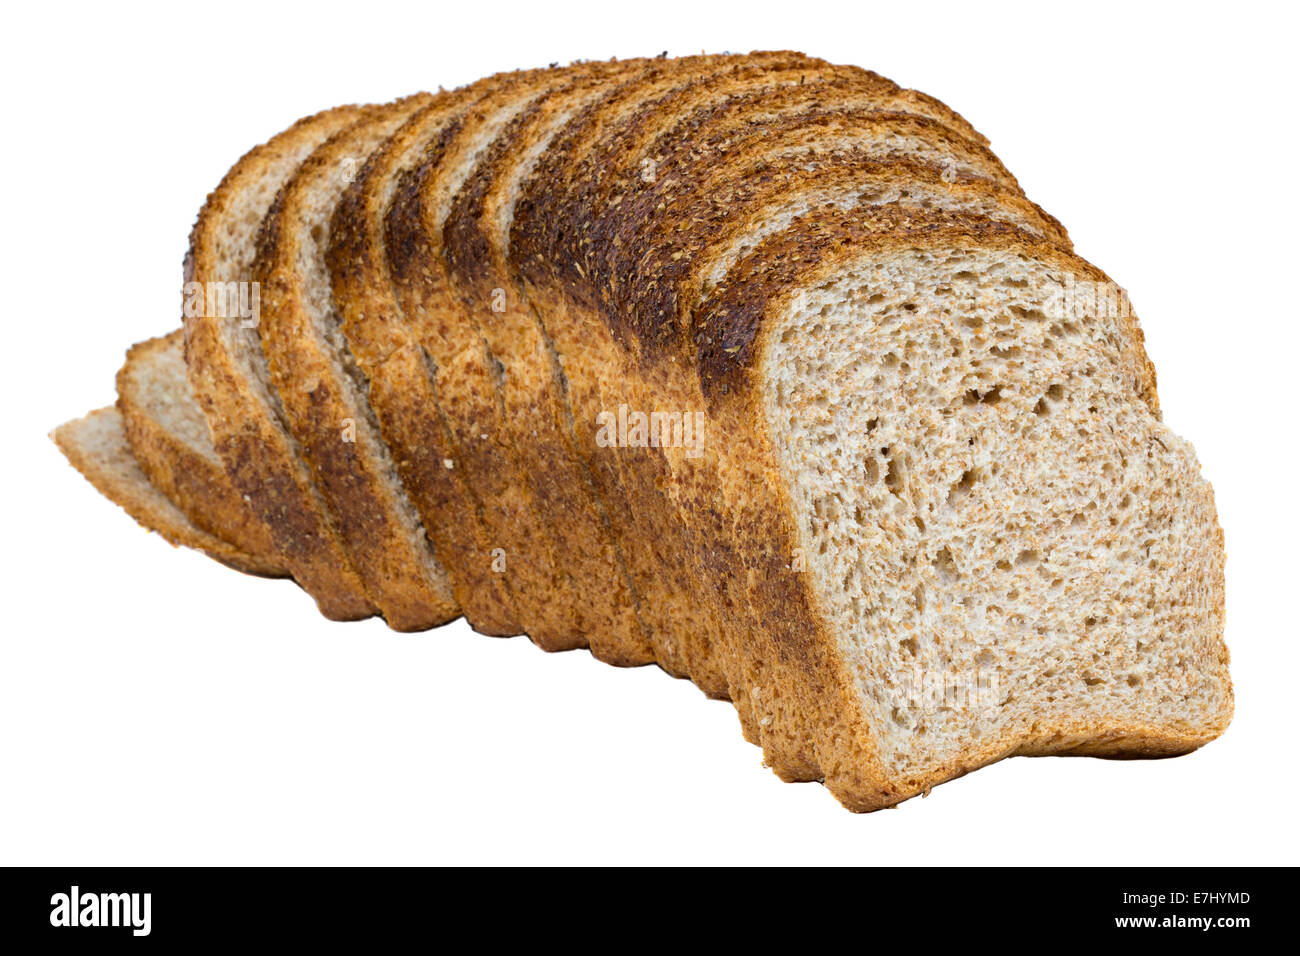 Sliced bread isolated on a white background Stock Photo